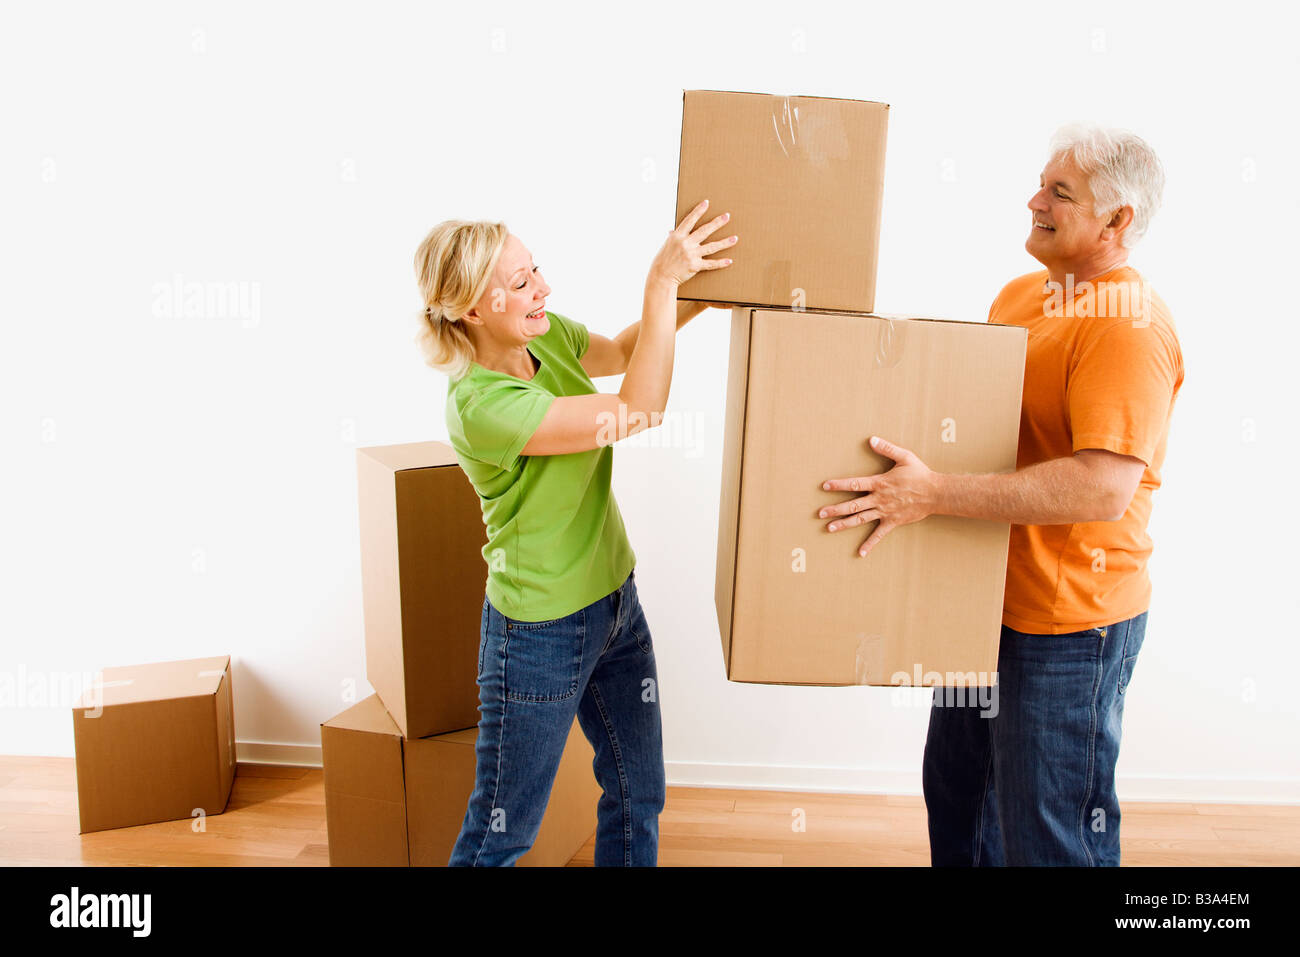 Middle aged man holding cardboard moving boxes while woman places one on stack Stock Photo